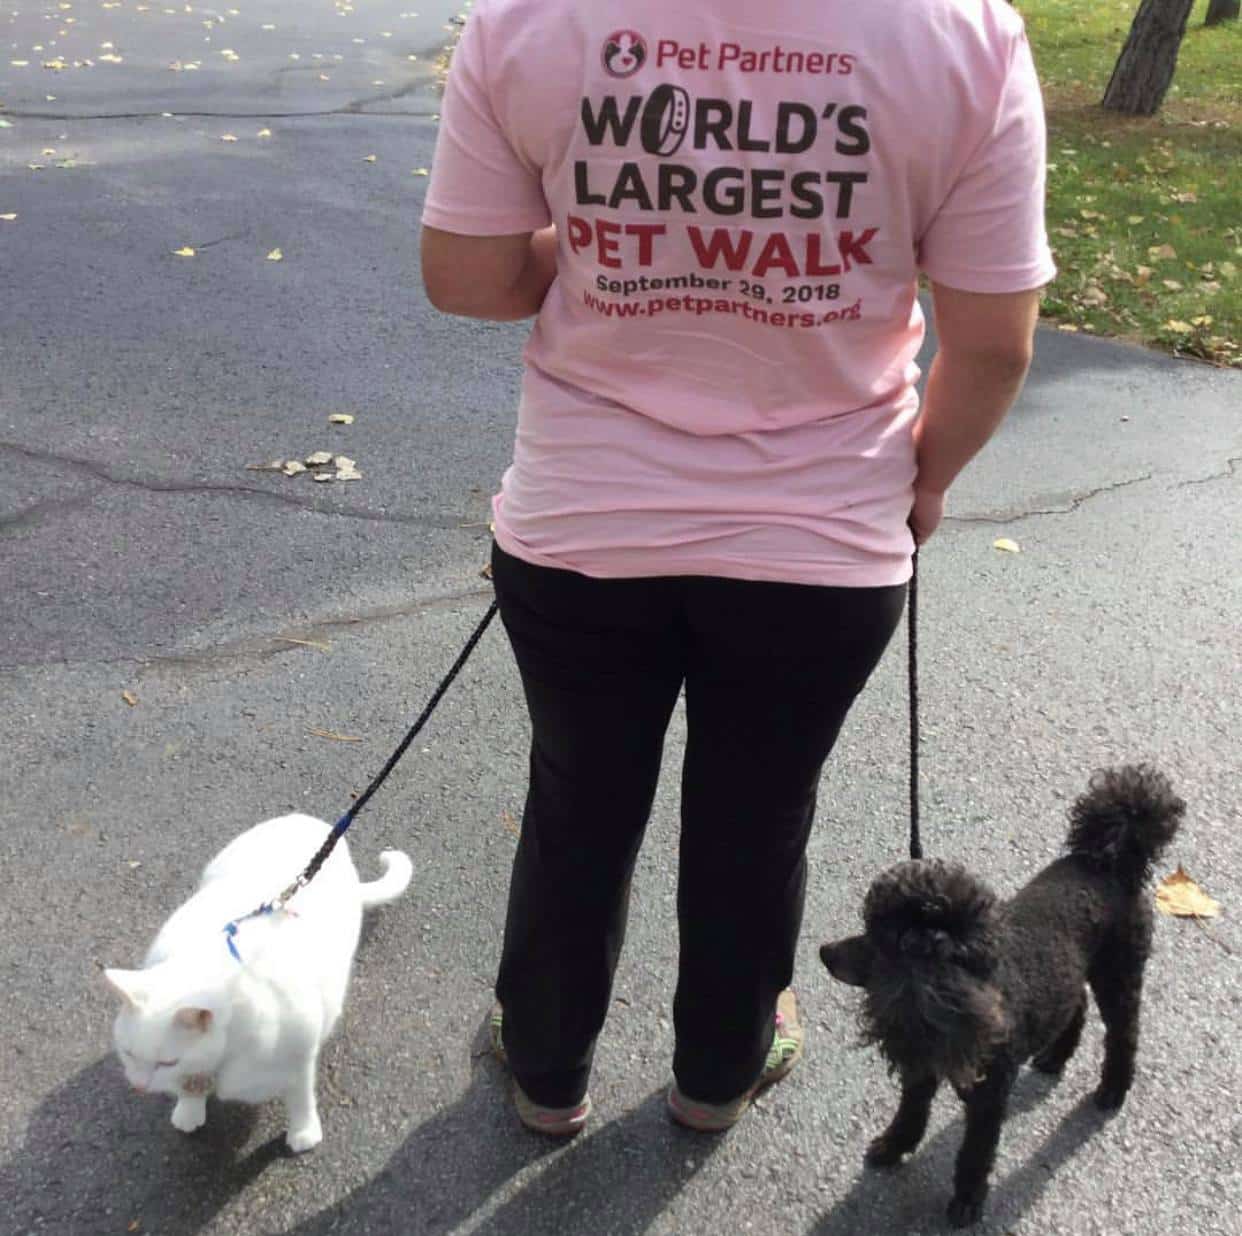 Cat and dog with handler during World's Largest Pet Walk 2018